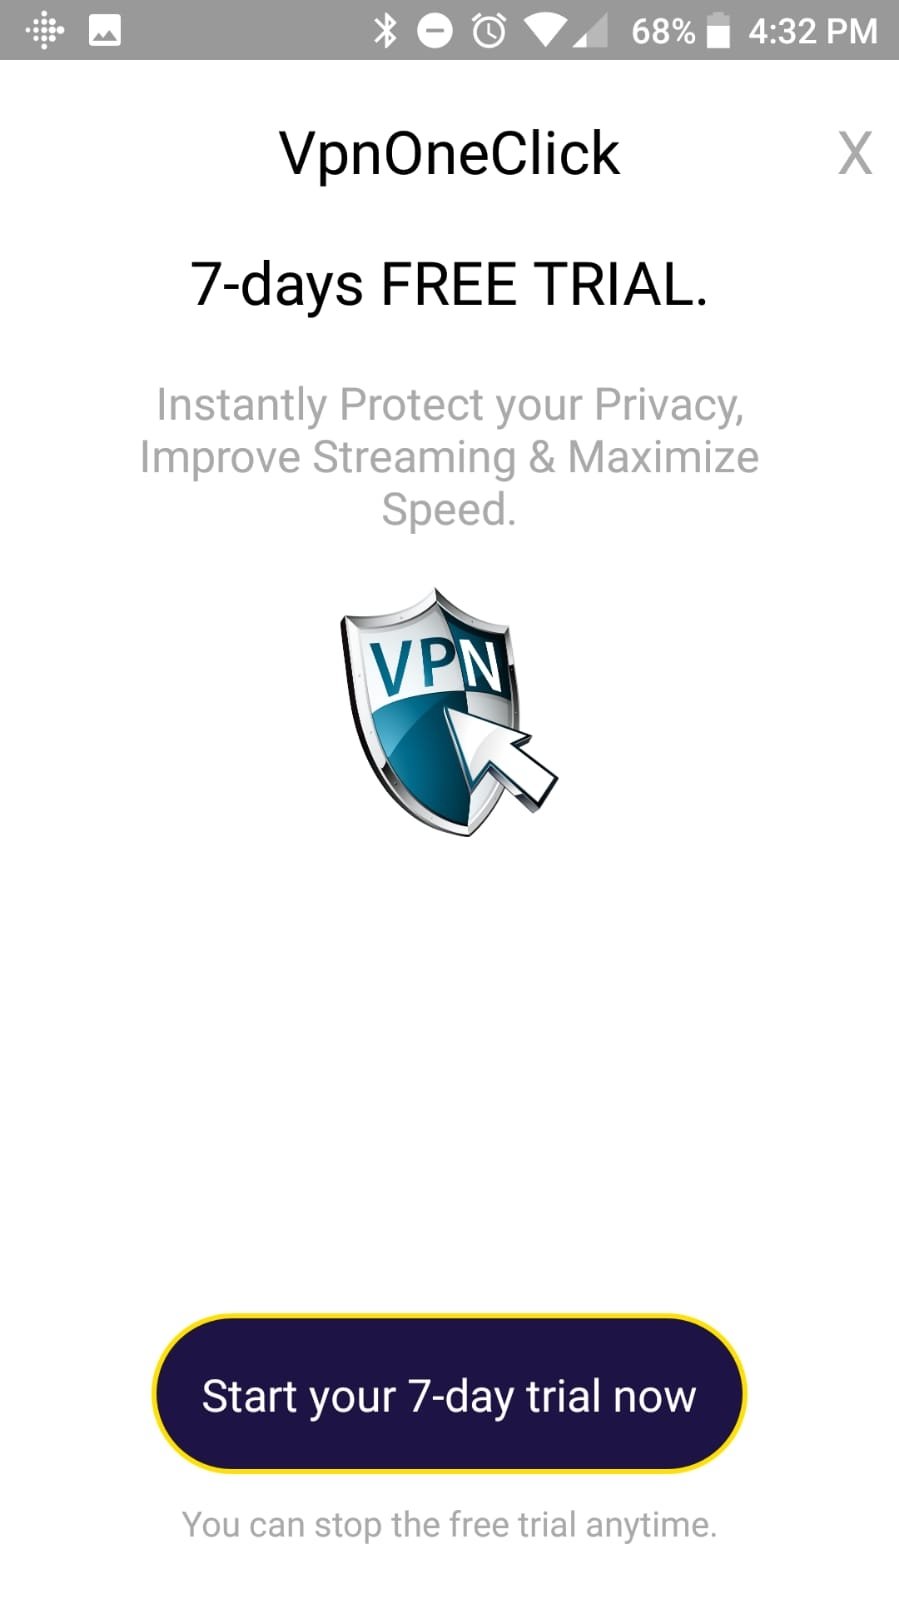 how to get vpn one click for free